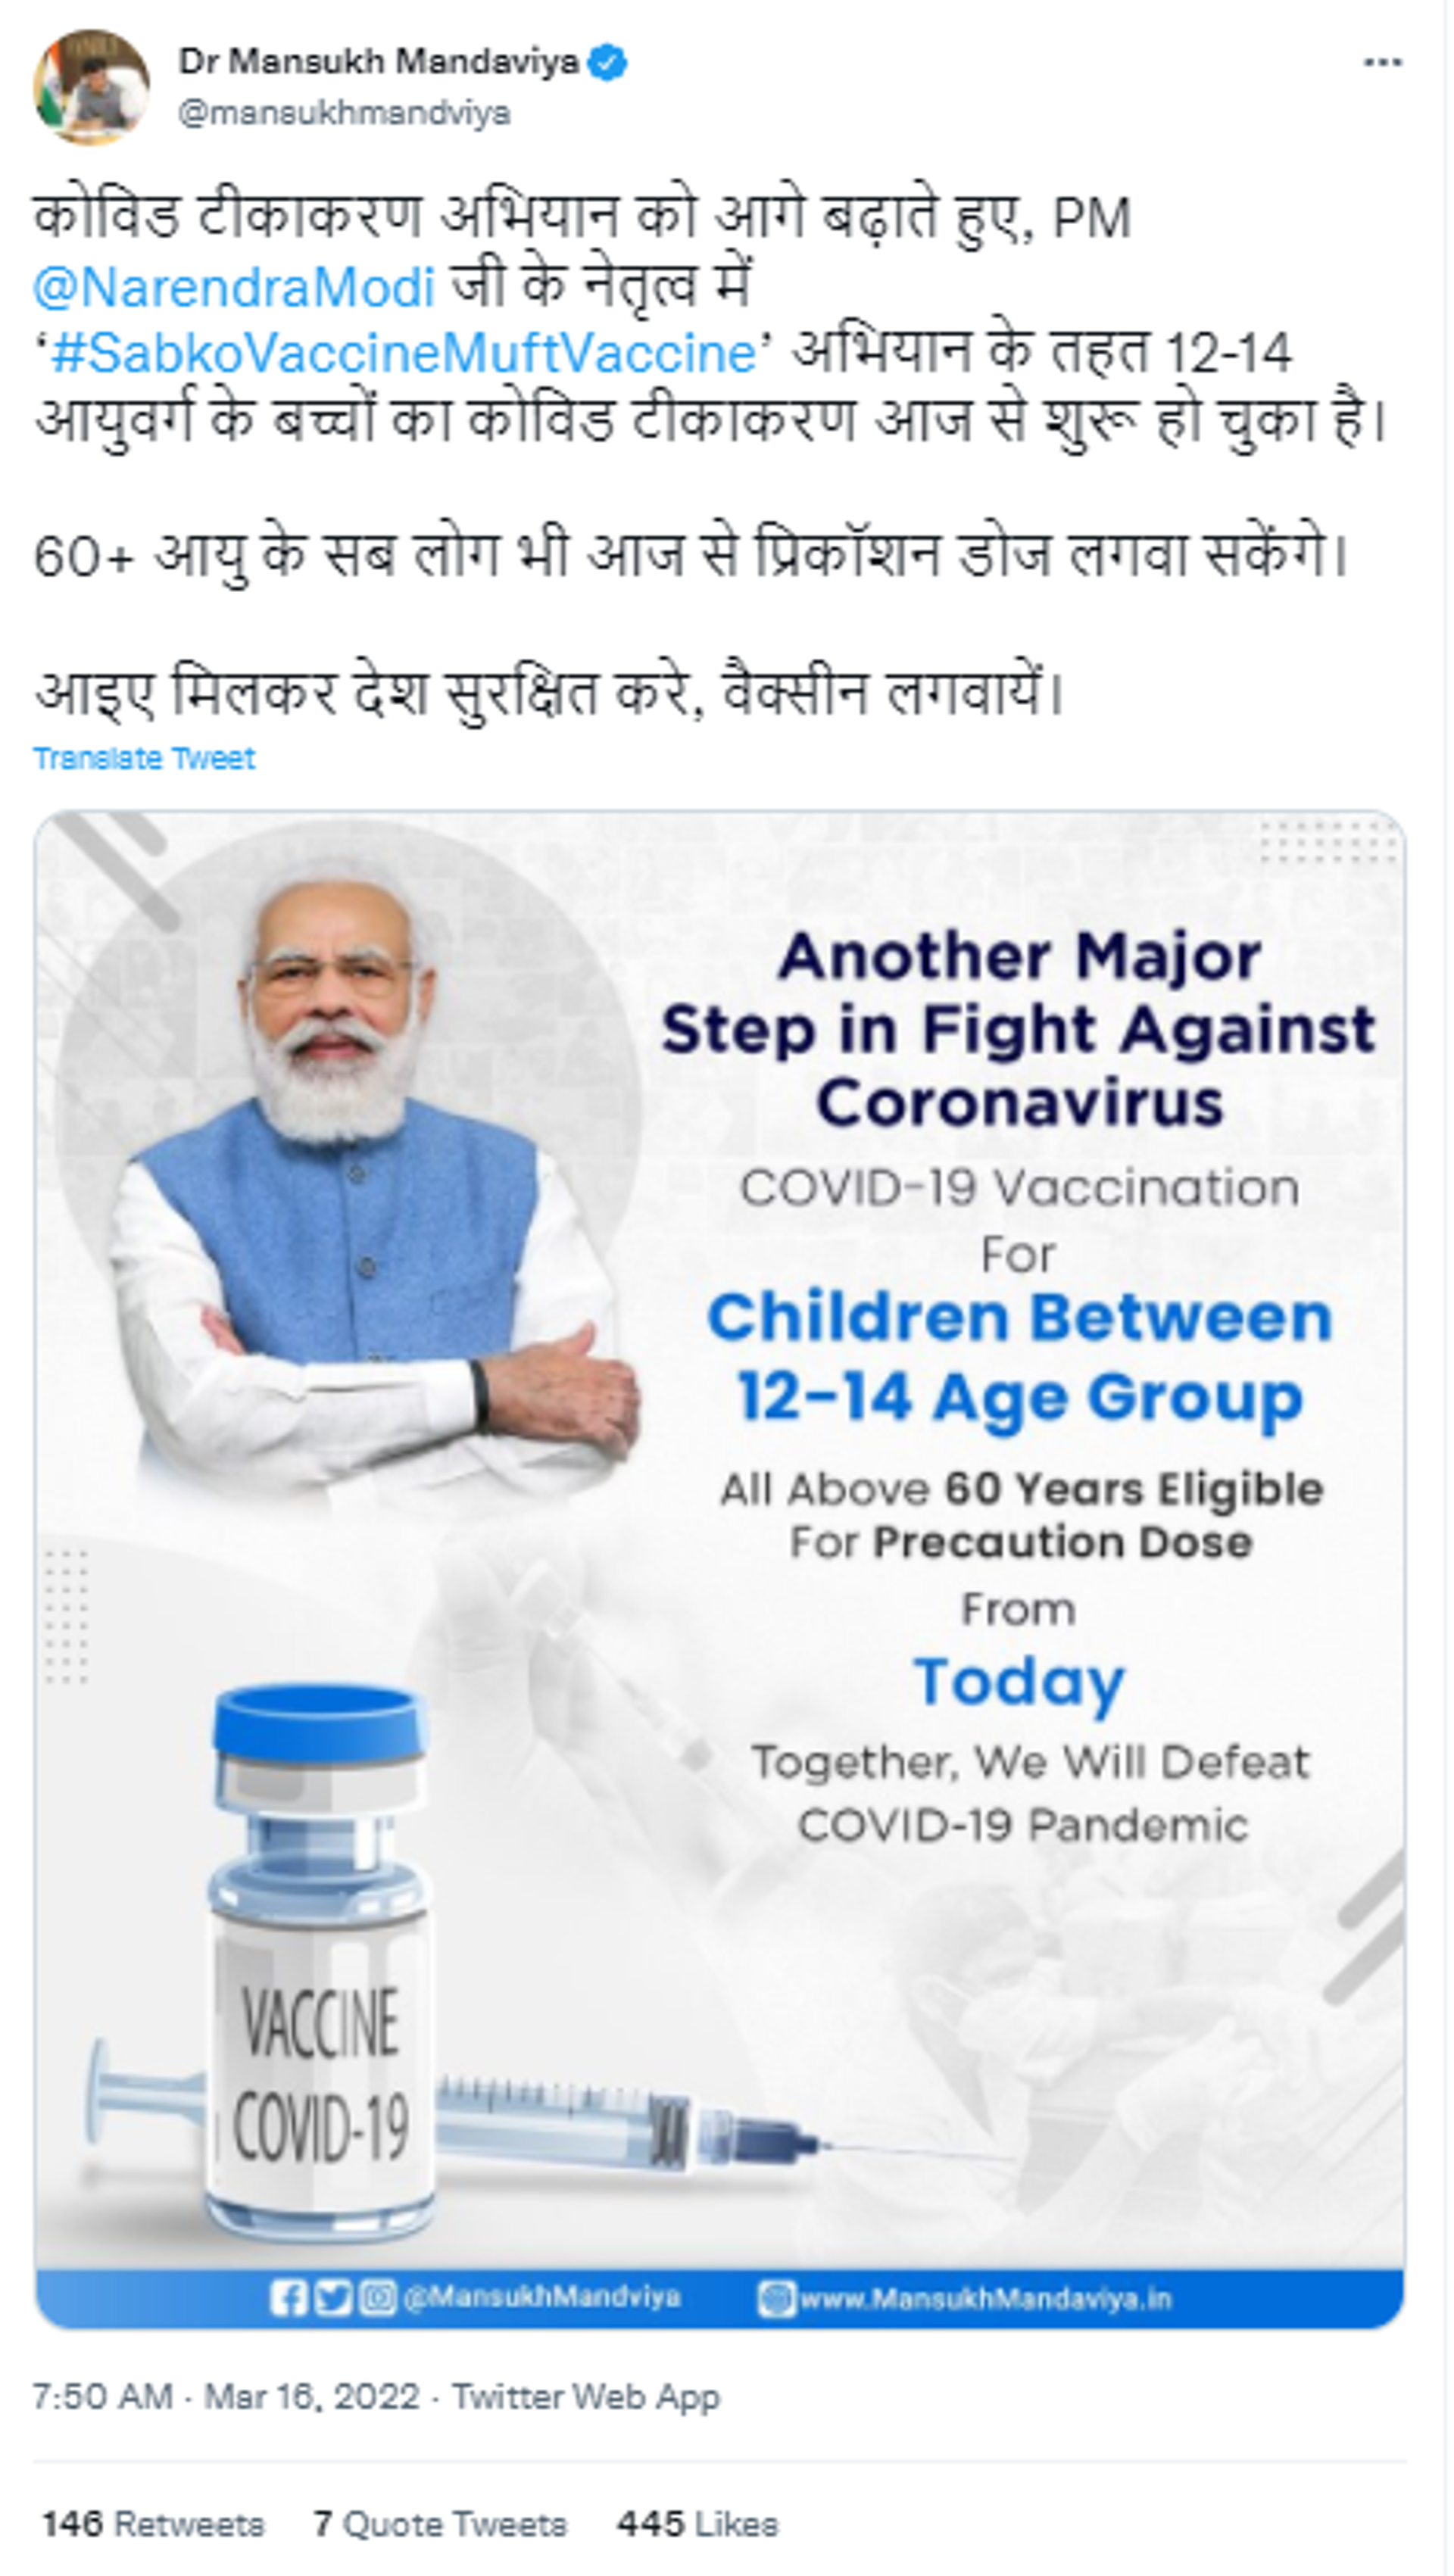 Federal Health Minister Mansukh Mandaviya Tweets about COVID Vaccination Starting for Children in 12-14 Year Age Group - Sputnik International, 1920, 16.03.2022